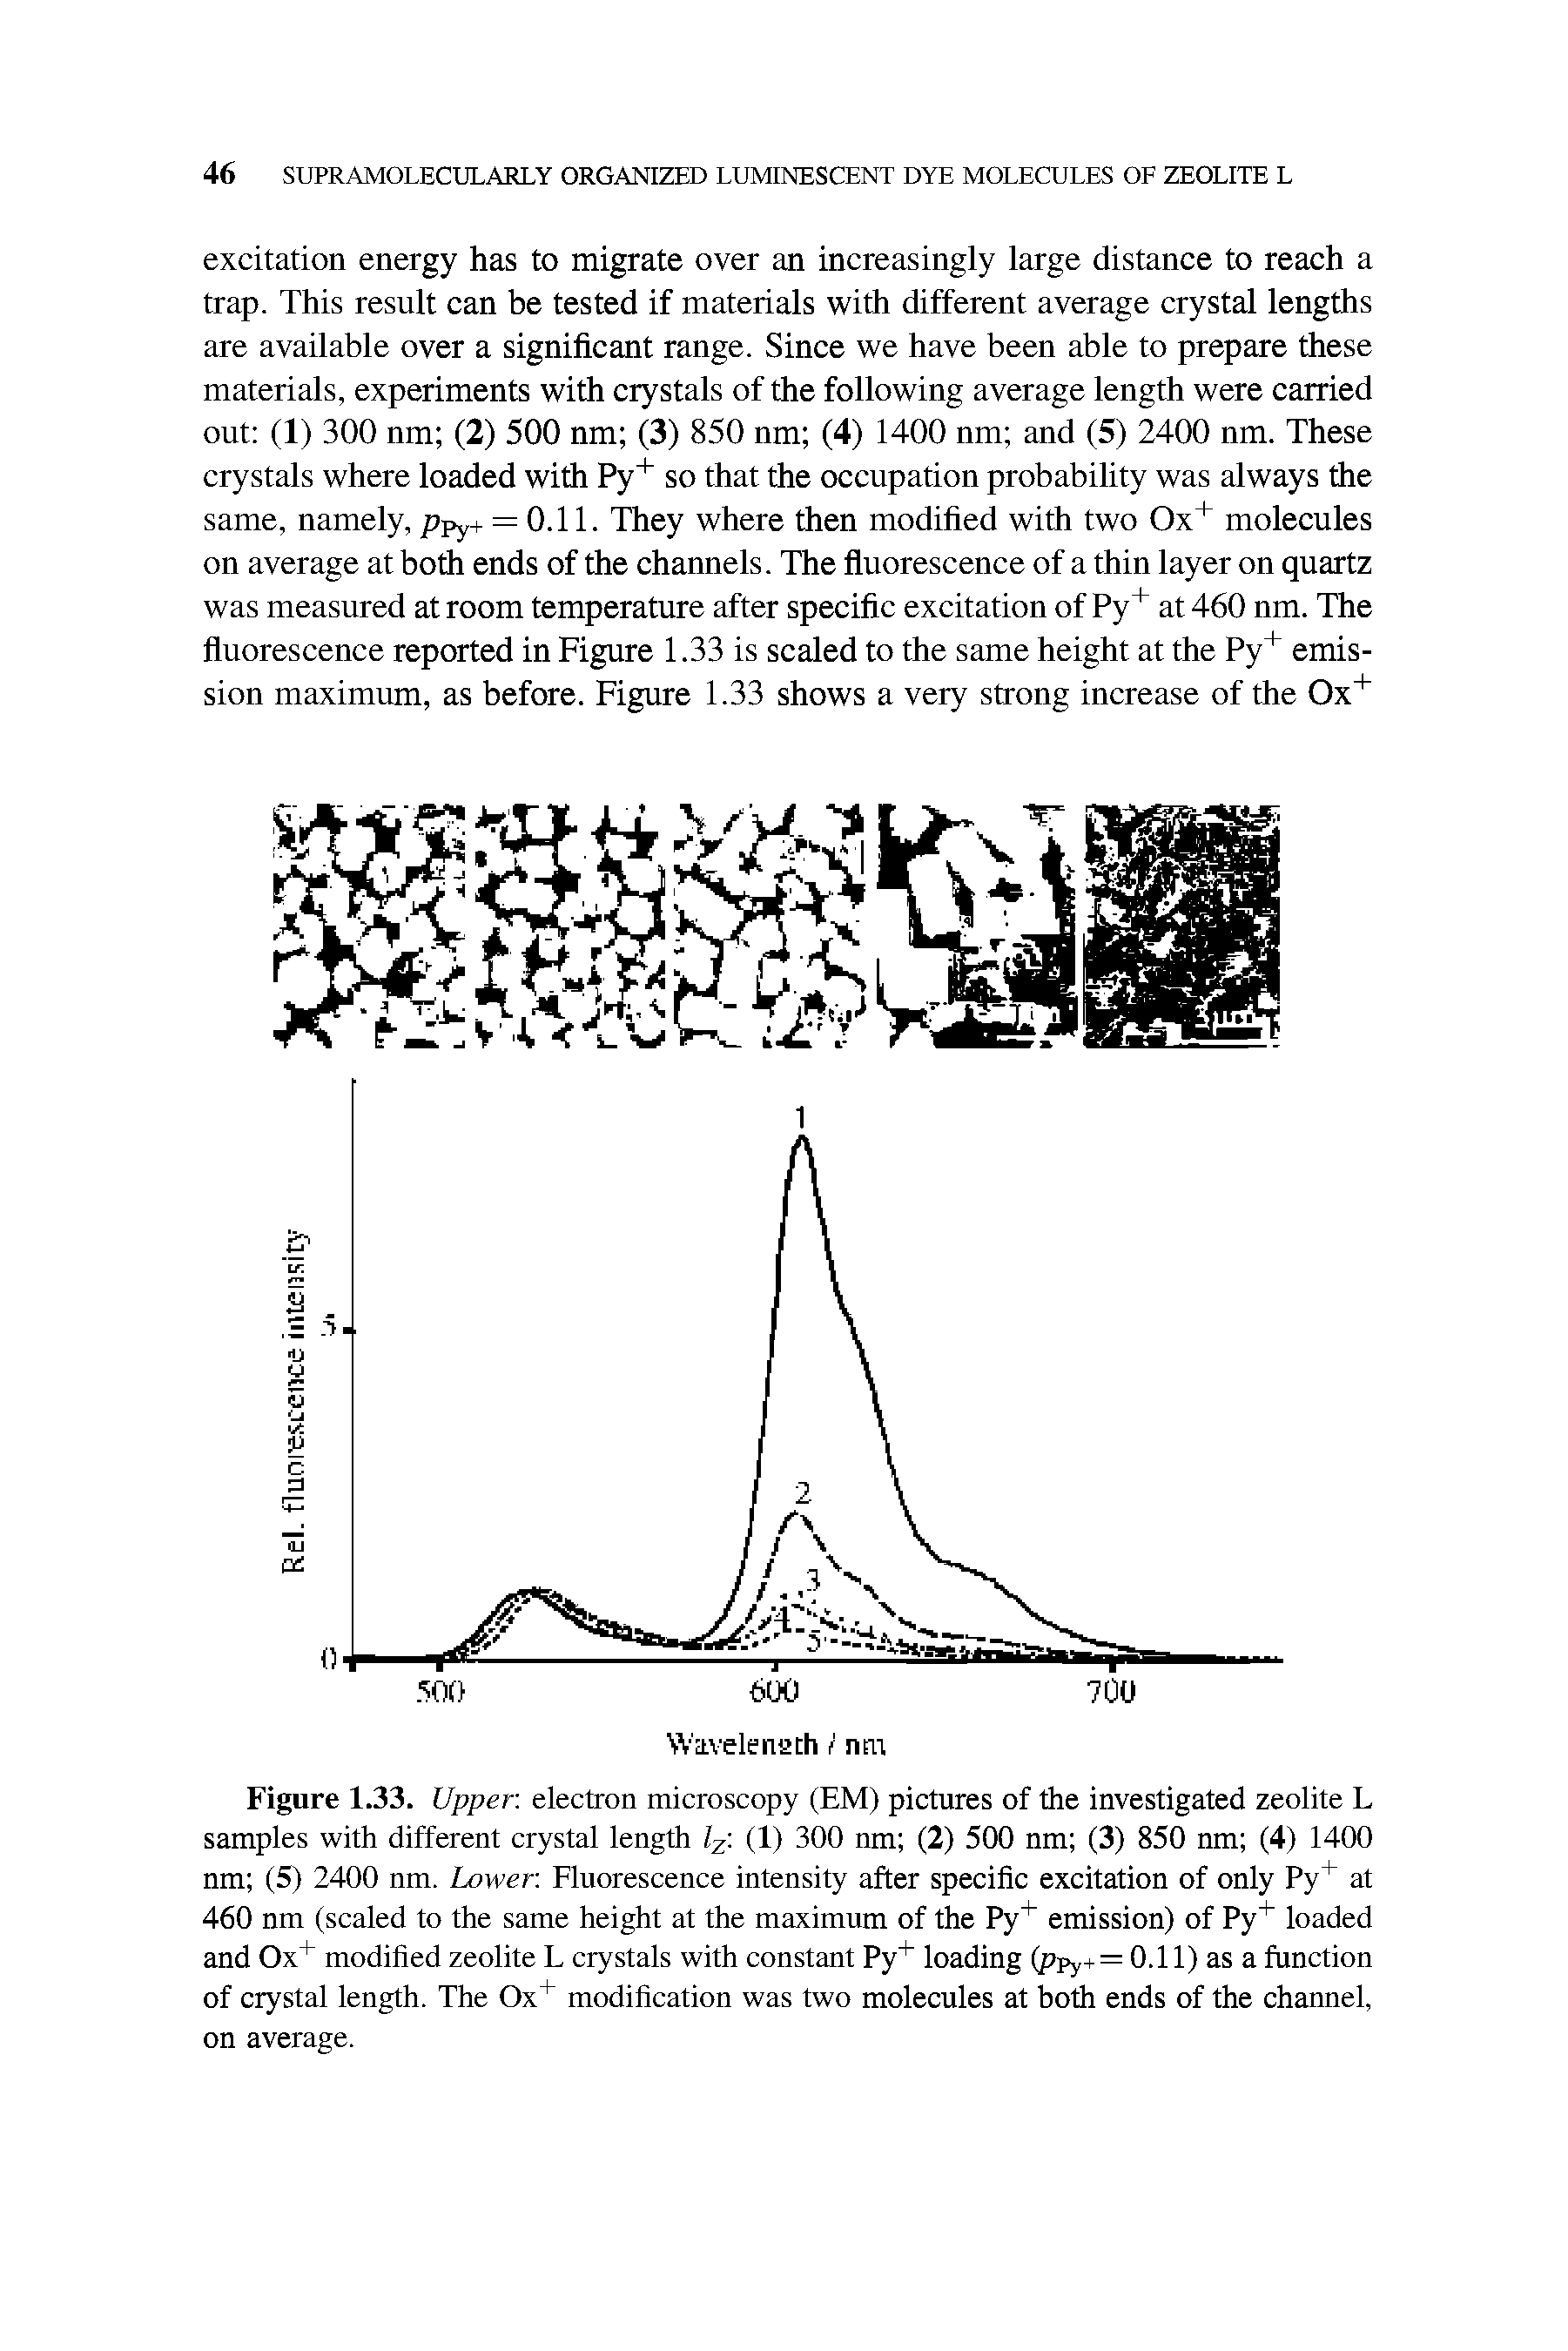 Figure 1.33. Upper electron microscopy (EM) pictures of the investigated zeolite L samples with different crystal length lz (1) 300 nm (2) 500 nm (3) 850 nm (4) 1400 nm (5) 2400 nm. Lower Fluorescence intensity after specific excitation of only Py+ at 460 nm (scaled to the same height at the maximum of the Py+ emission) of Py+ loaded and Ox+ modified zeolite L crystals with constant Py+ loading (ppy+ = 0.11) as a function of crystal length. The Ox+ modification was two molecules at both ends of the channel, on average.